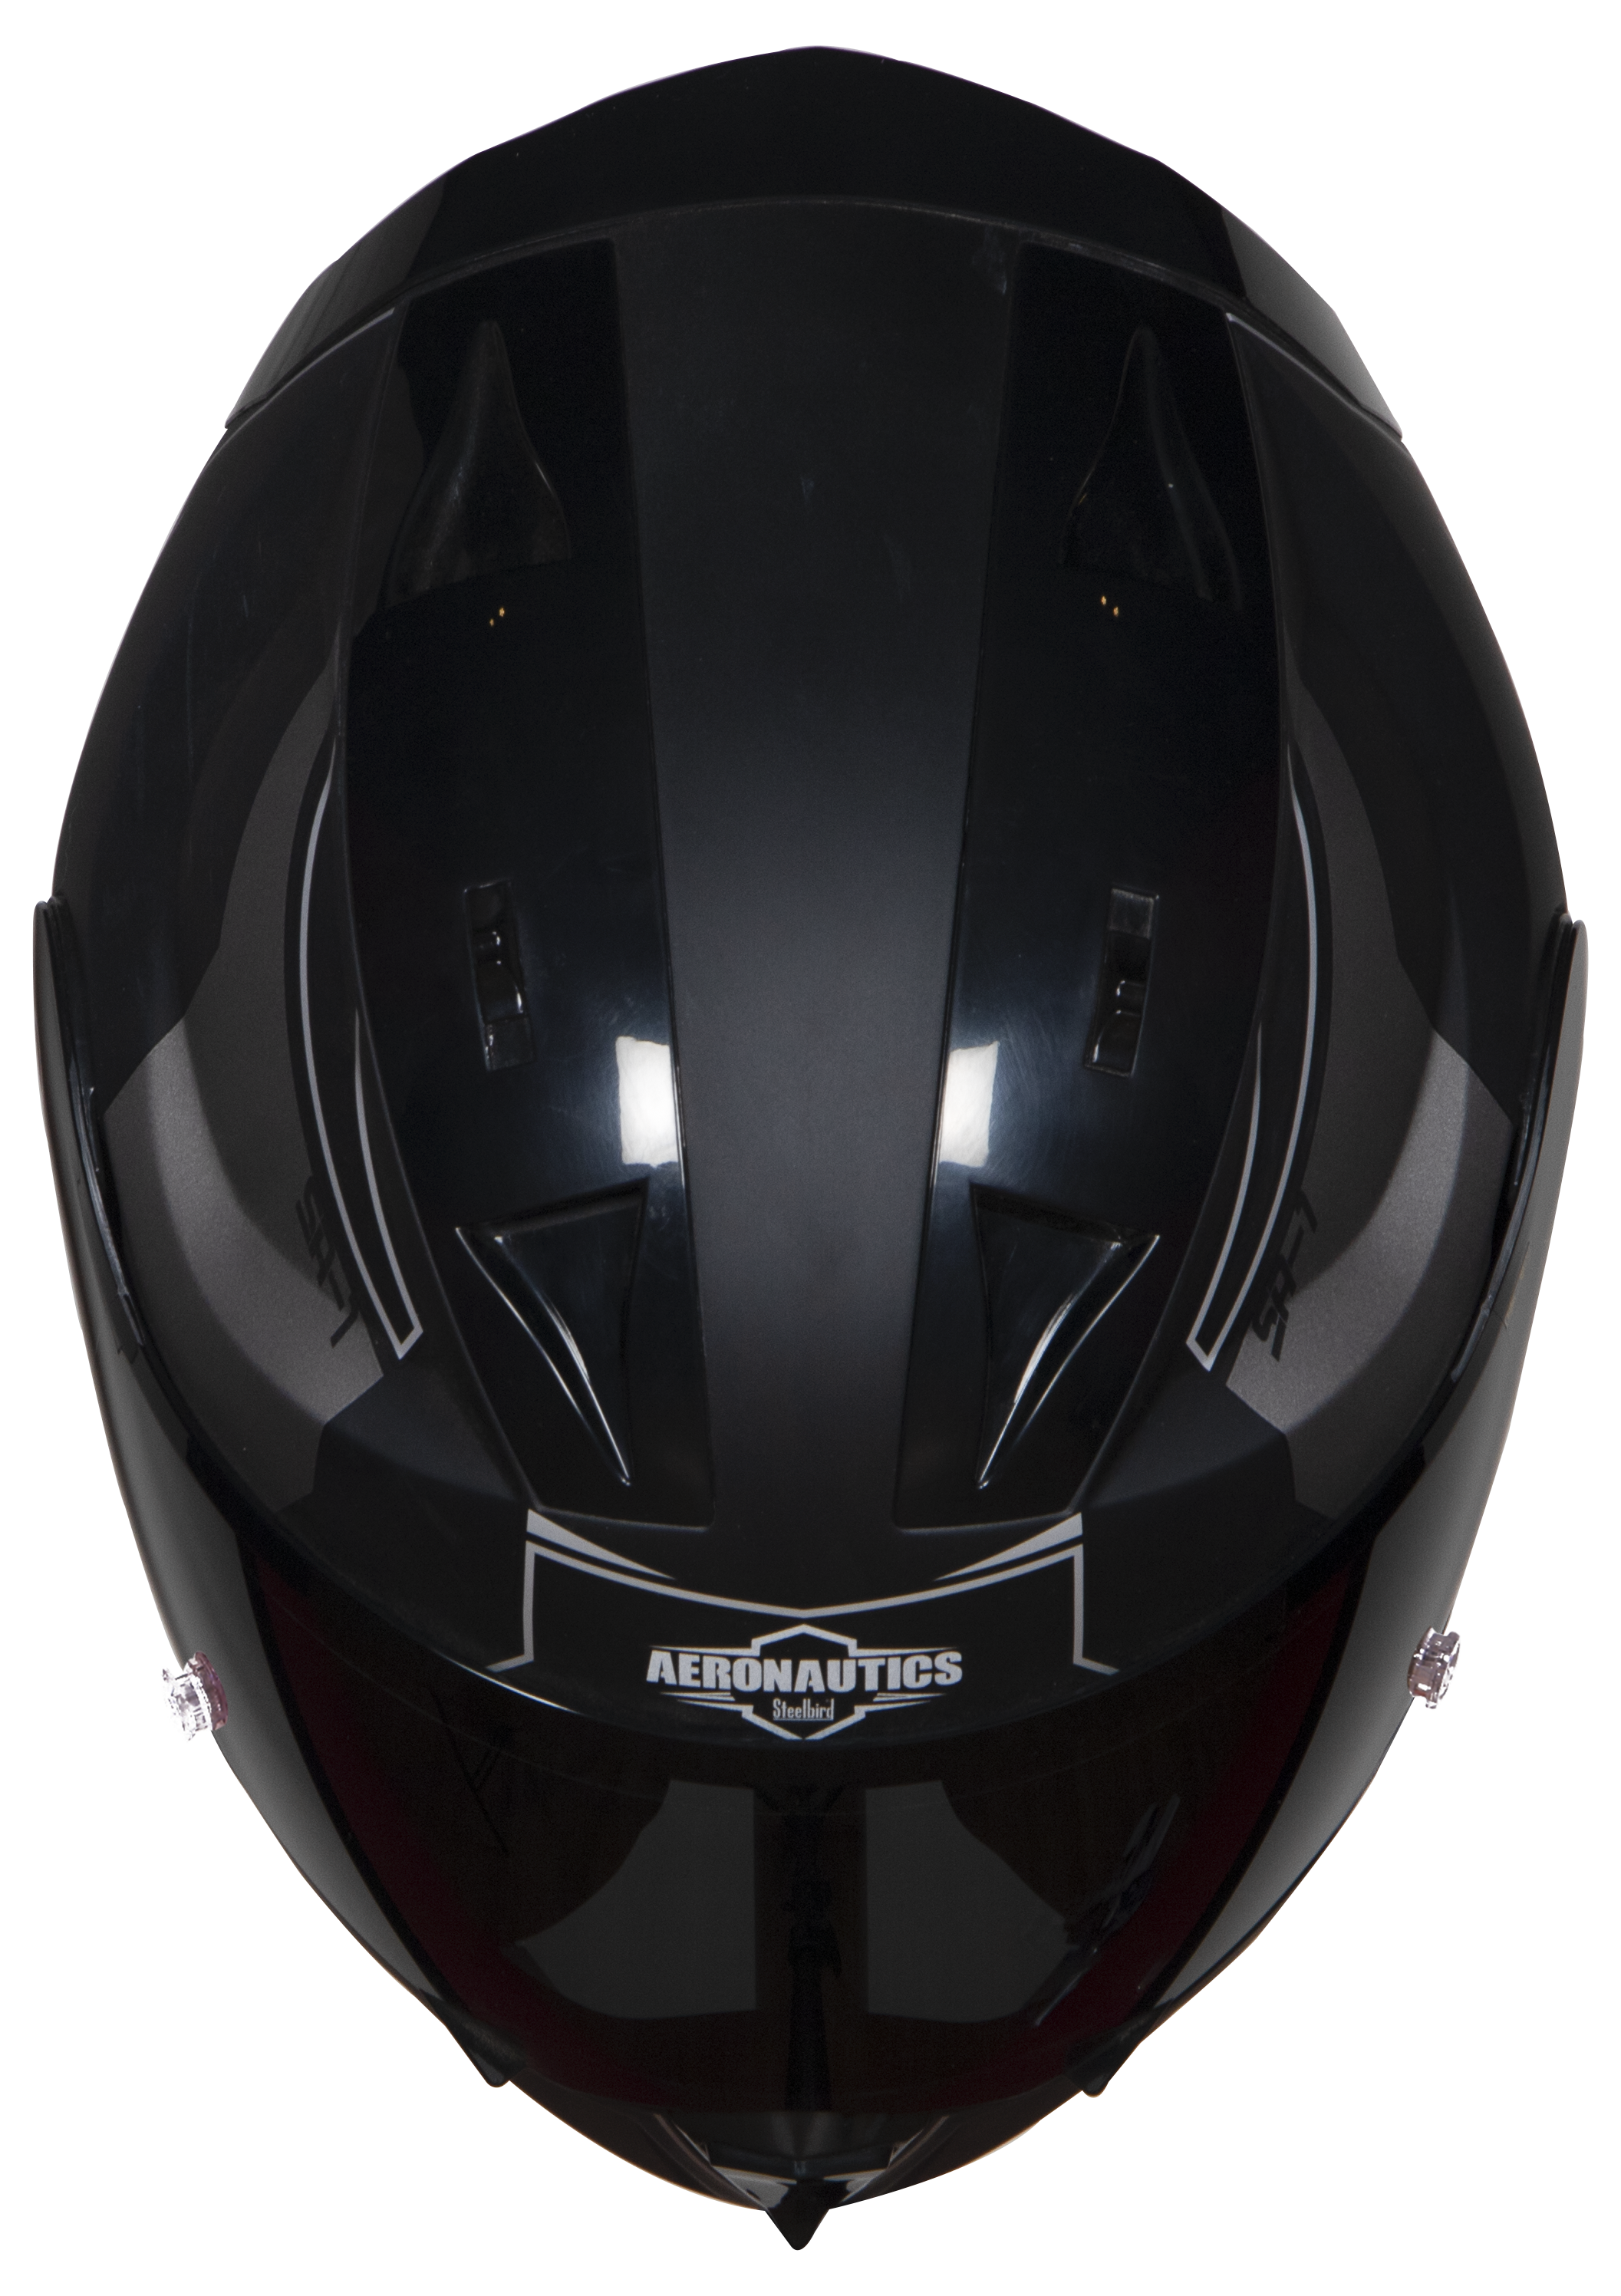 SA-1 RTW Mat Black/White With Anti-Fog Shield Gold Chrome Visor(Fitted With Clear Visor Extra Gold Chrome Anti-Fog Shield Visor Free)